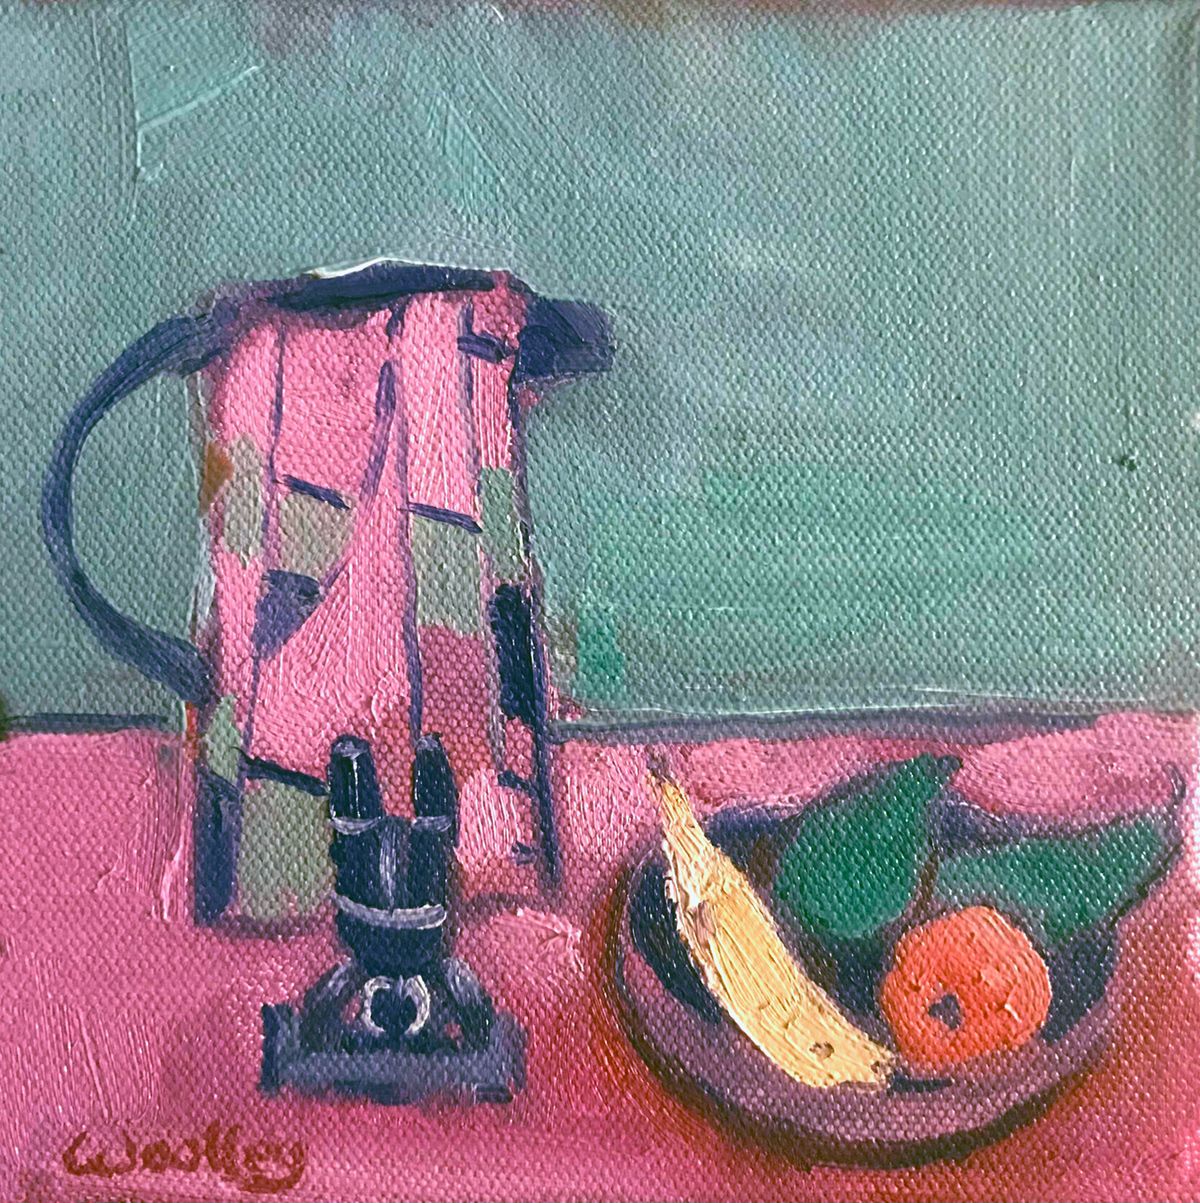 Still Life with Jug by Eleanor Woolley